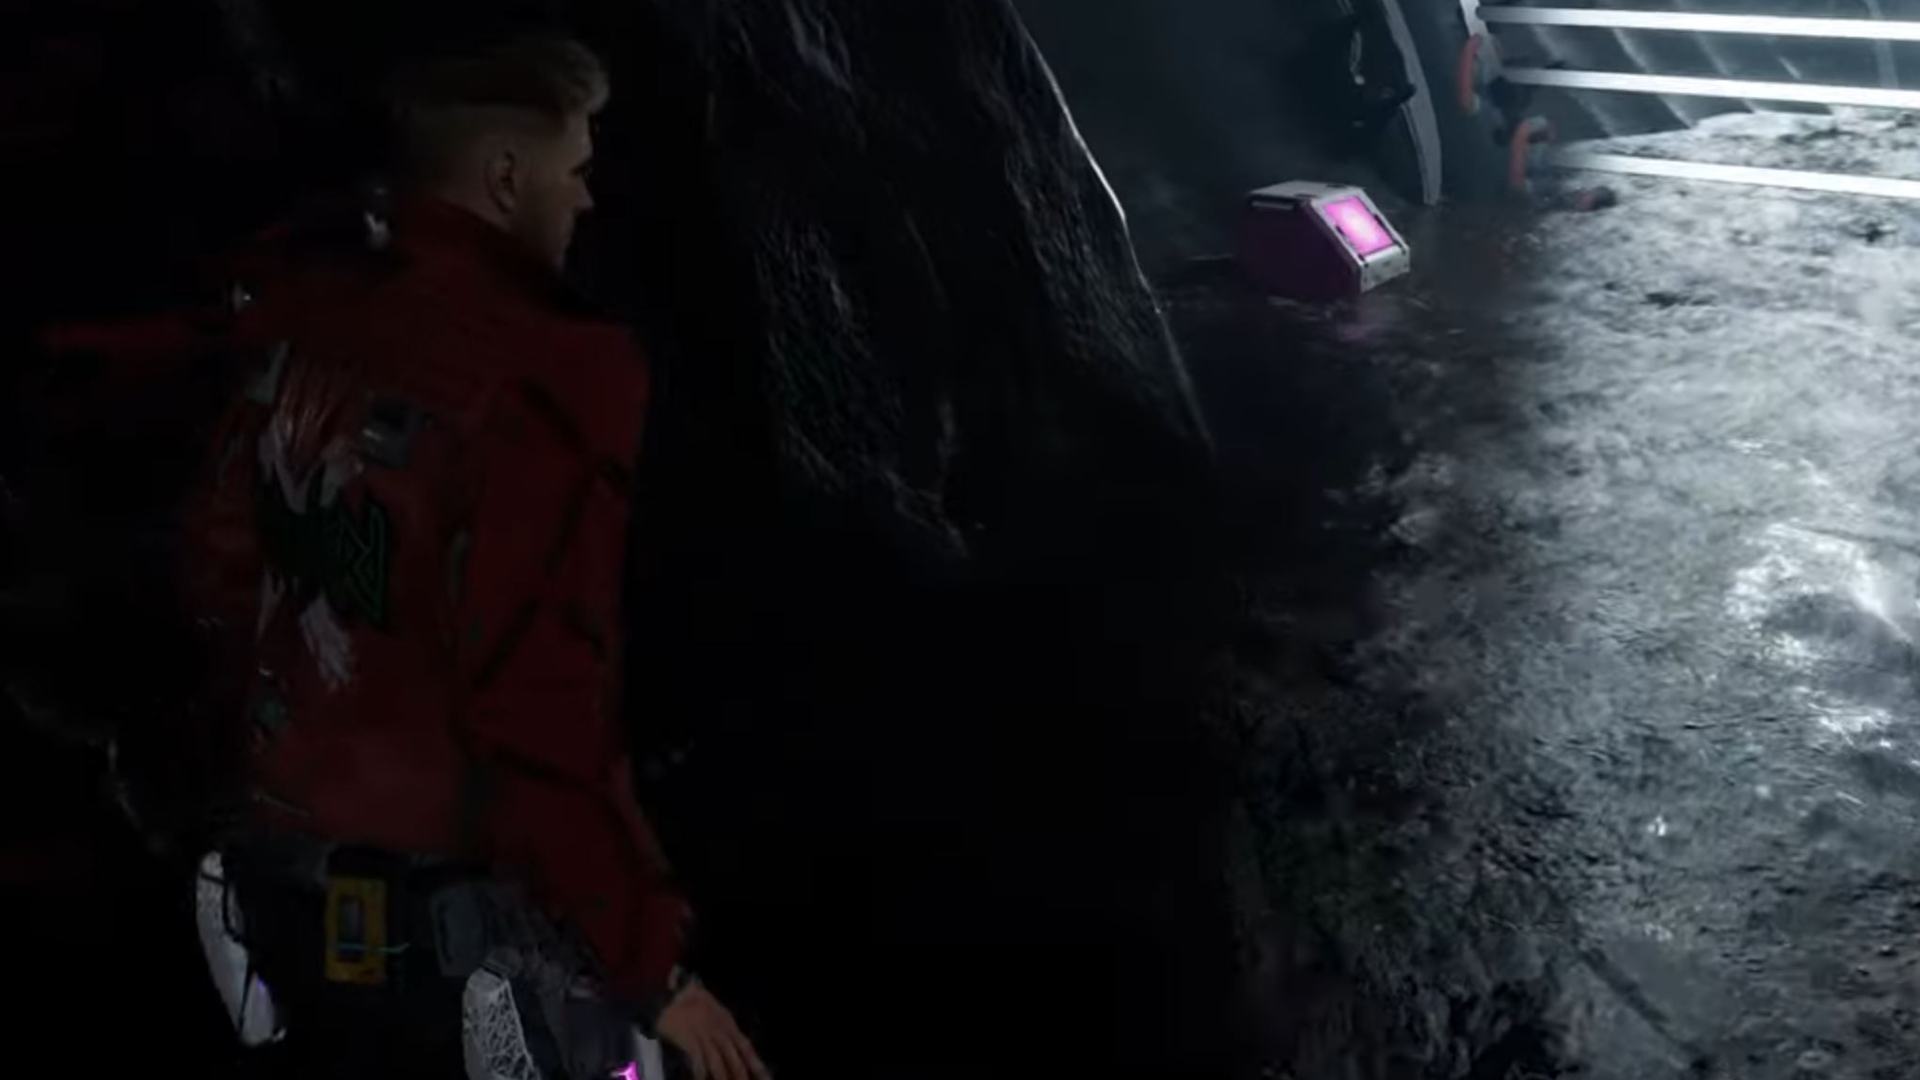 Guardians of the Galaxy outfit locations: Star-Lord can be seen turning the corner to find the outfit box.